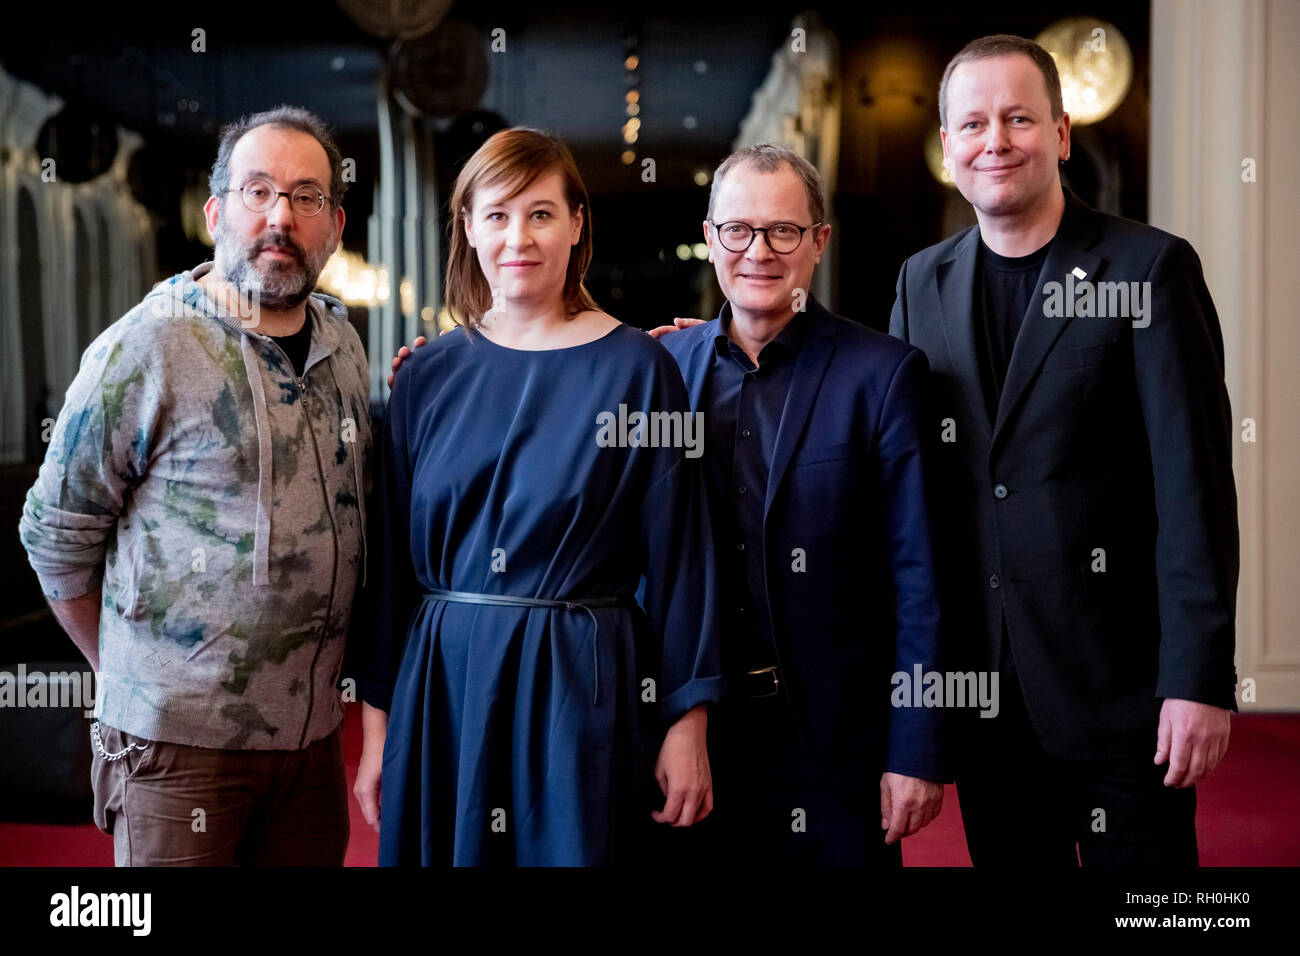 Berlin, Germany. 31st Jan, 2019. Barrie Kosky (l-r), current artistic director and designated in-house director of the Komische Oper Berlin, Susanne Moser, managing director and designated co-director of the Komische Oper Berlin, Philip Bröking, opera director and designated co-director of the Komische Oper Berlin, and Klaus Lederer (Die Linke), cultural senator of Berlin, will be together for a photo after a press conference on the future of the Komische Oper Berlin. Credit: Christoph Soeder/dpa/Alamy Live News Stock Photo